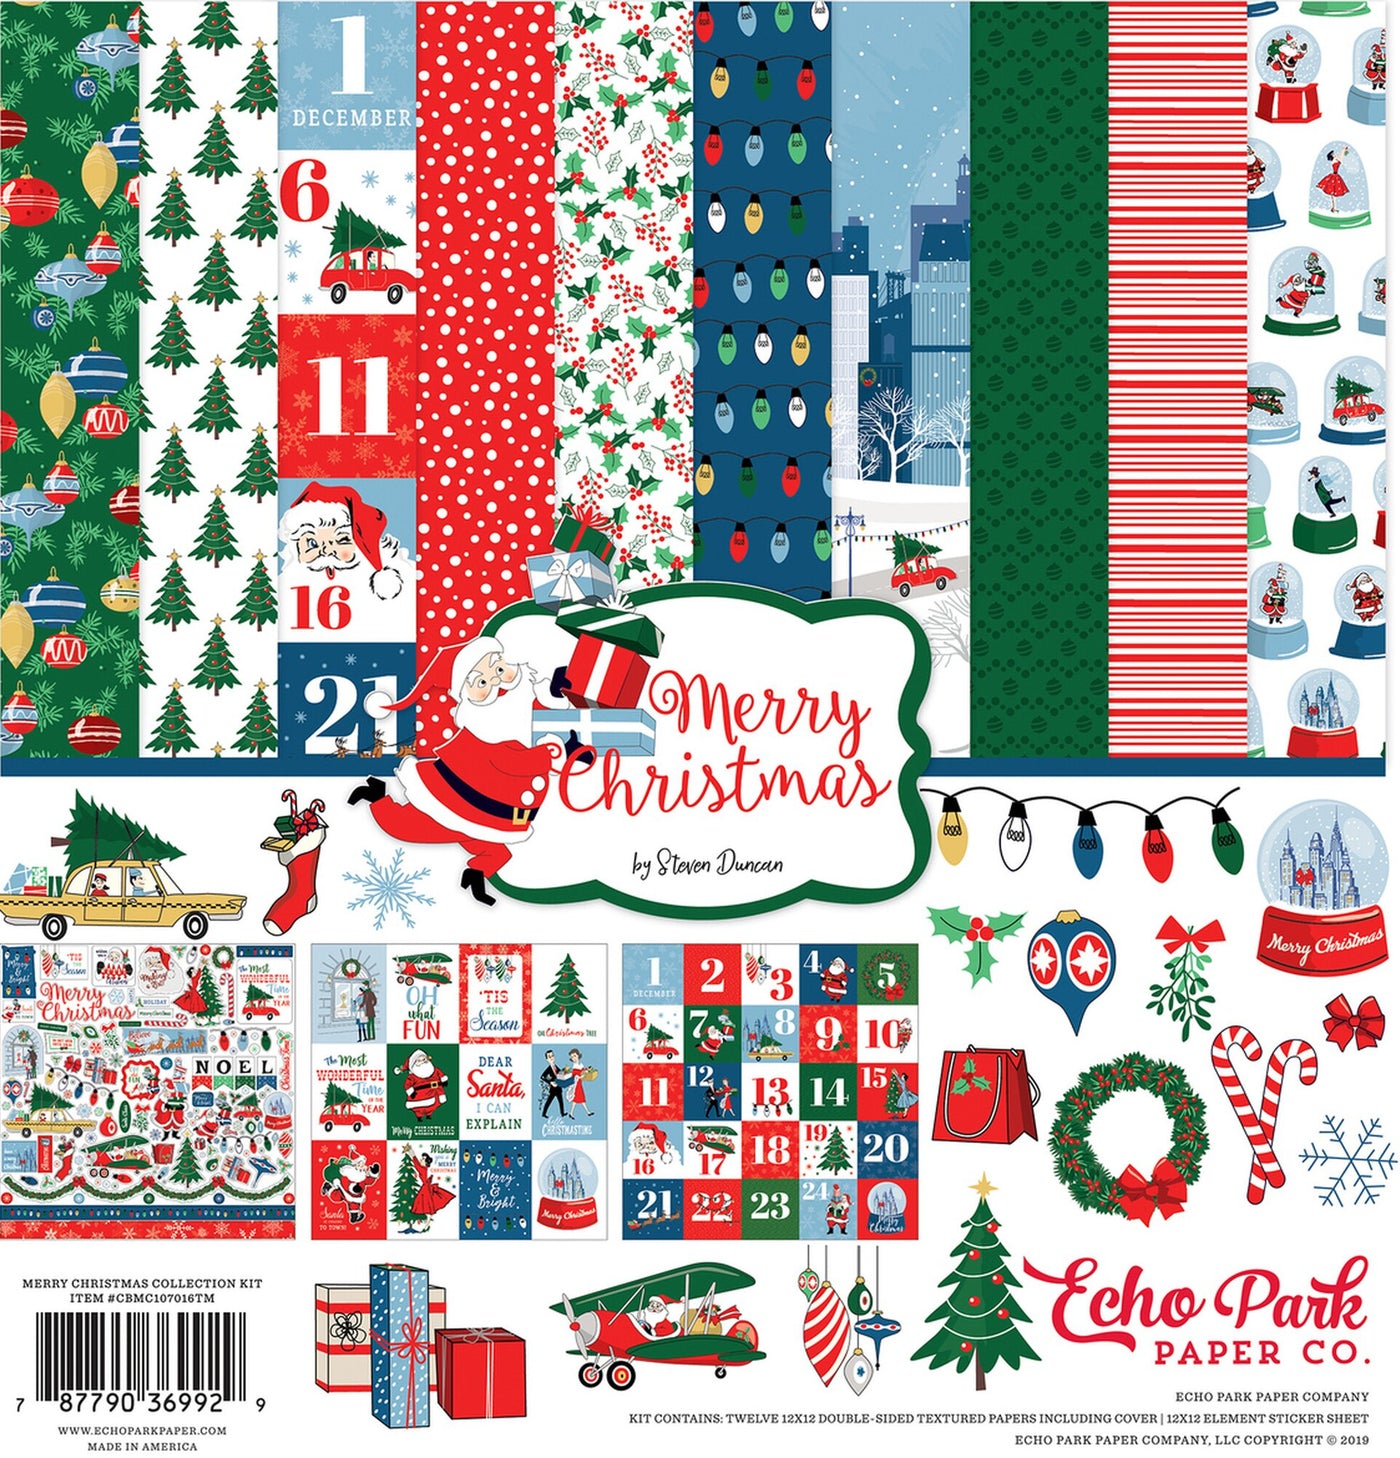 Merry Christmas - 12x12 collection kit from Echo Park Paper